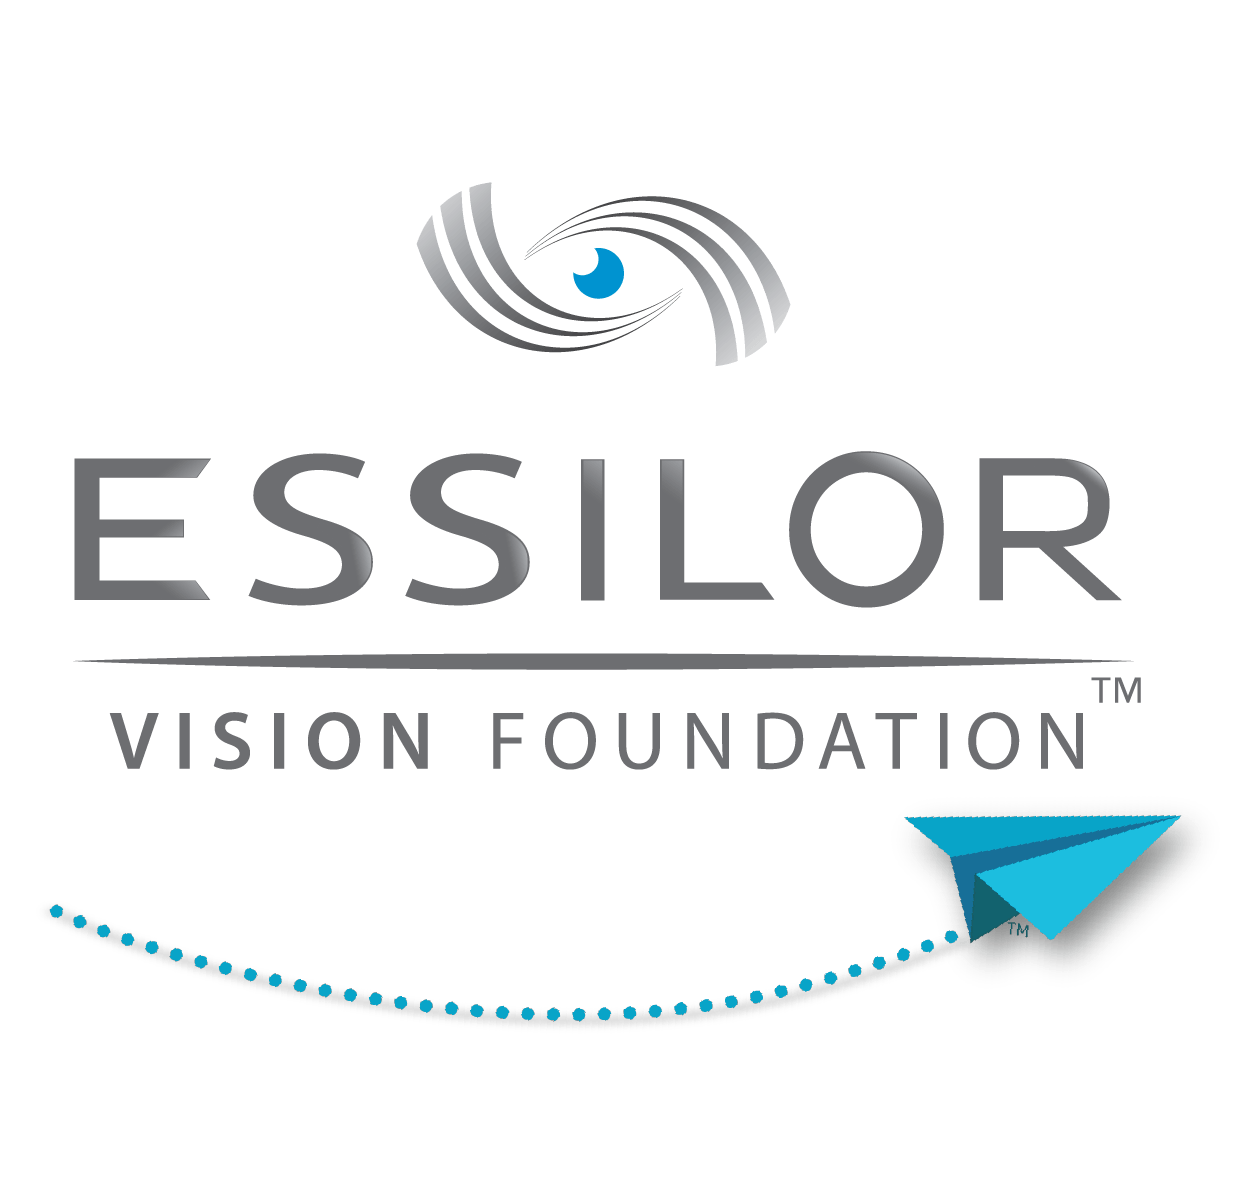 Essilor Logo - Giving People Clear Sight Vision Foundation is